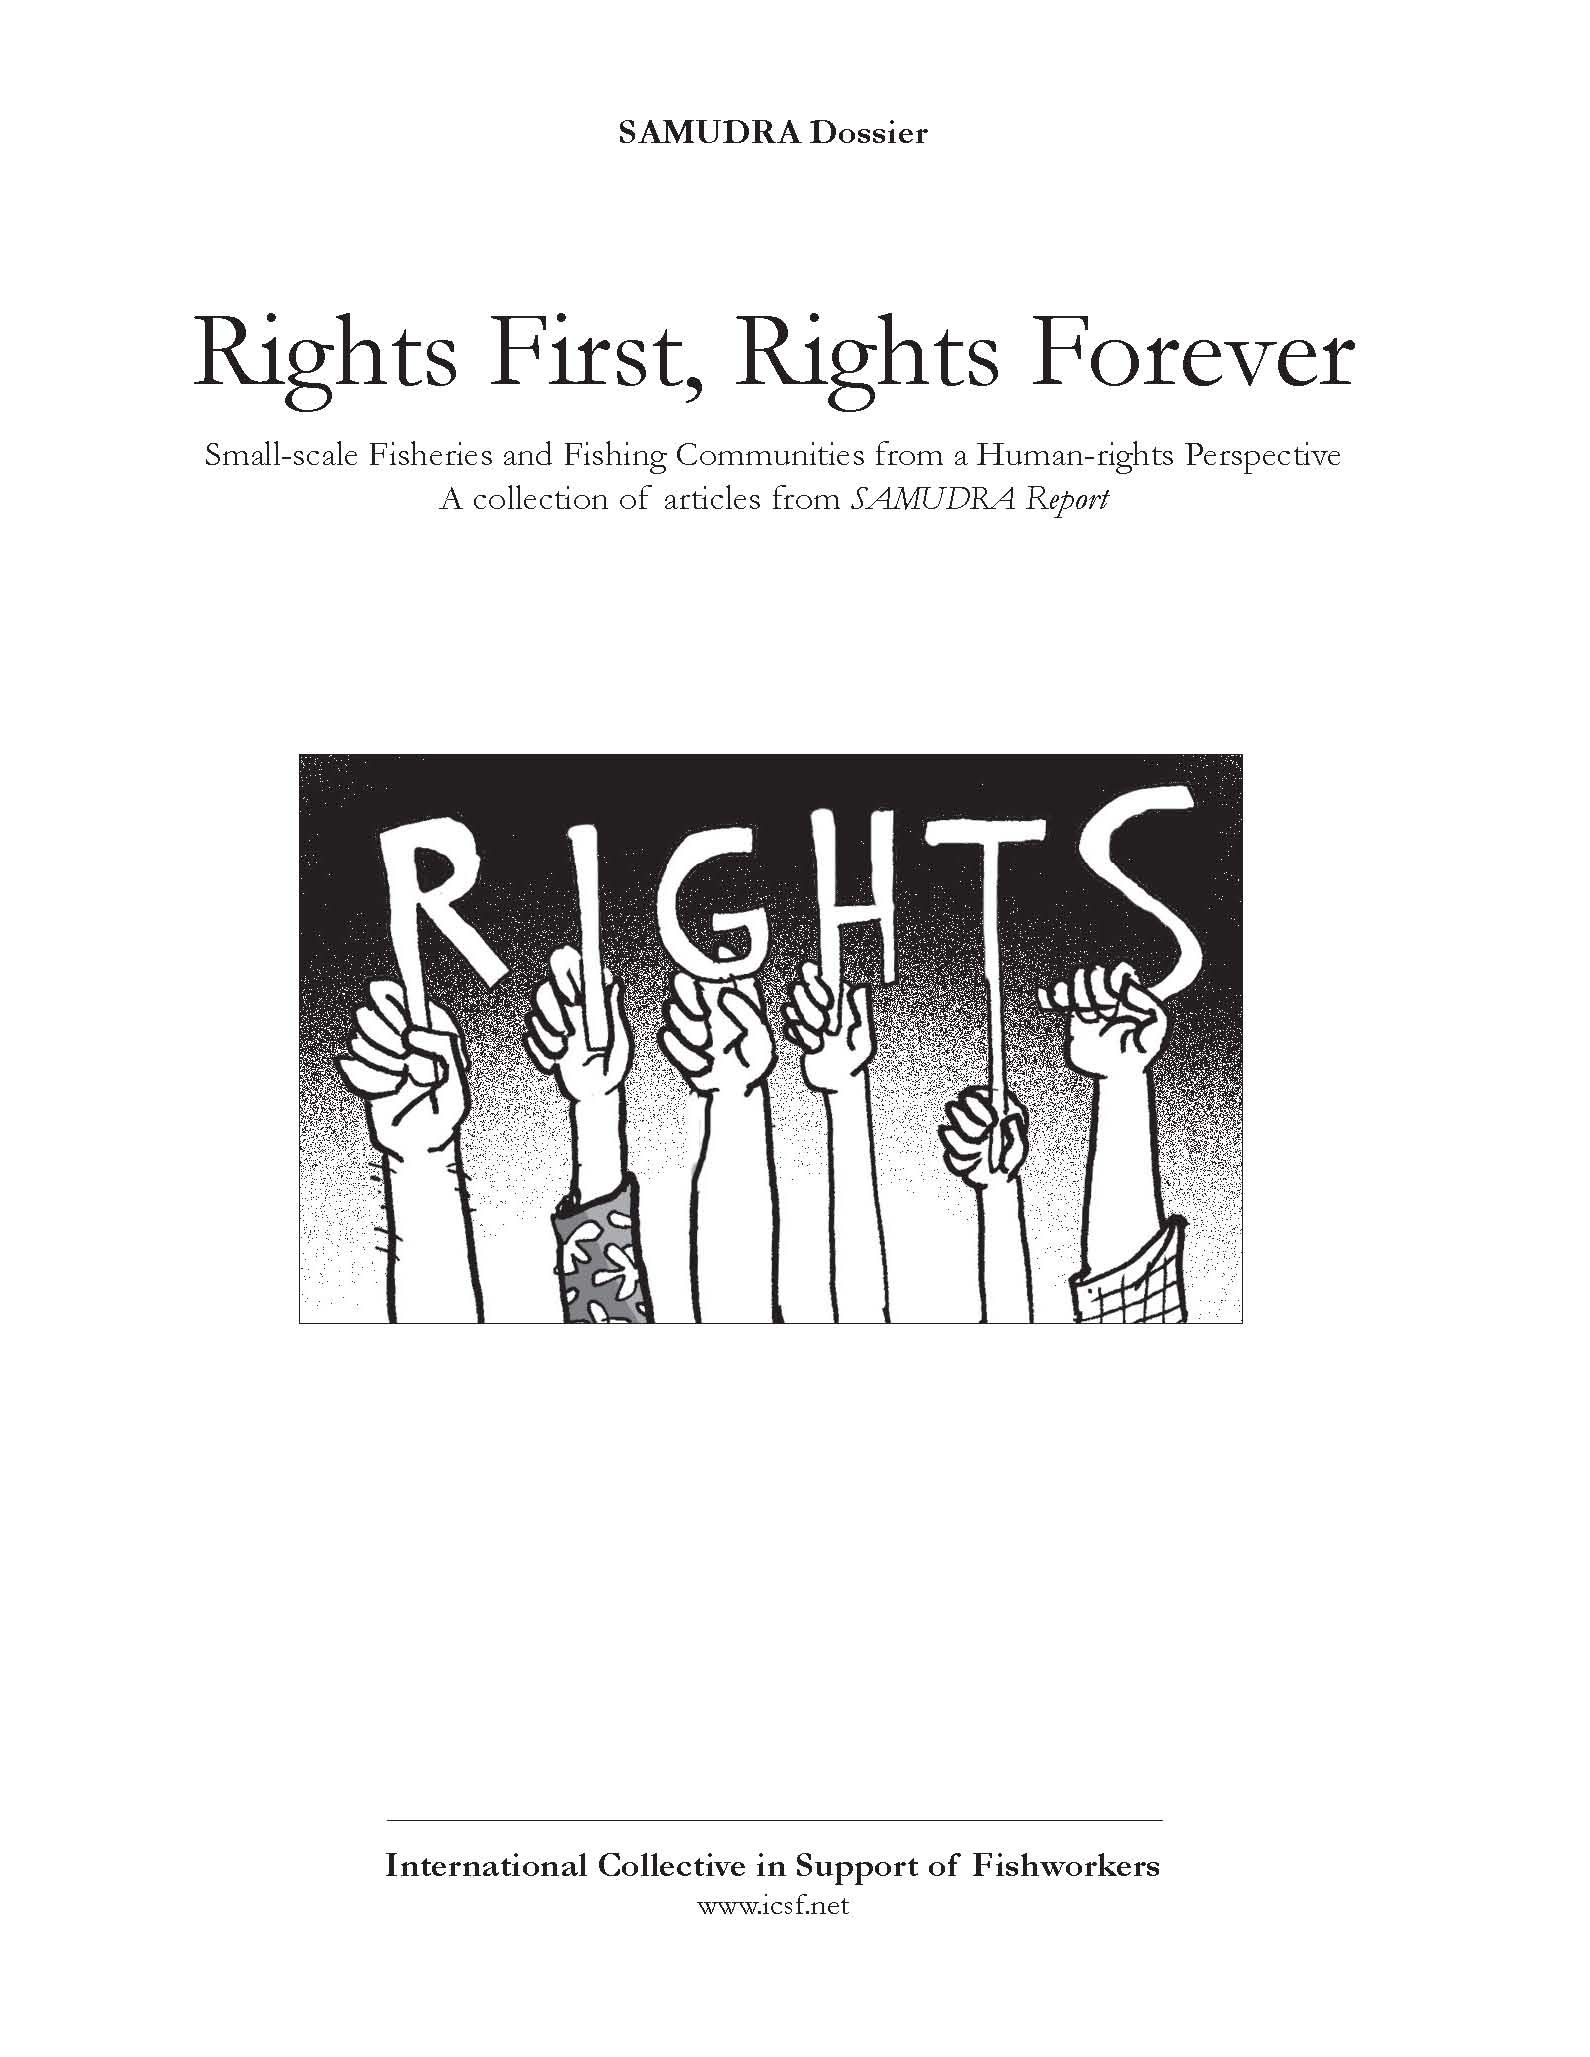 Rights First, Rights Forever: Small-scale Fisheries and Fishing Communities from a Human-rights Perspective – A collection of articles from SAMUDRA Report